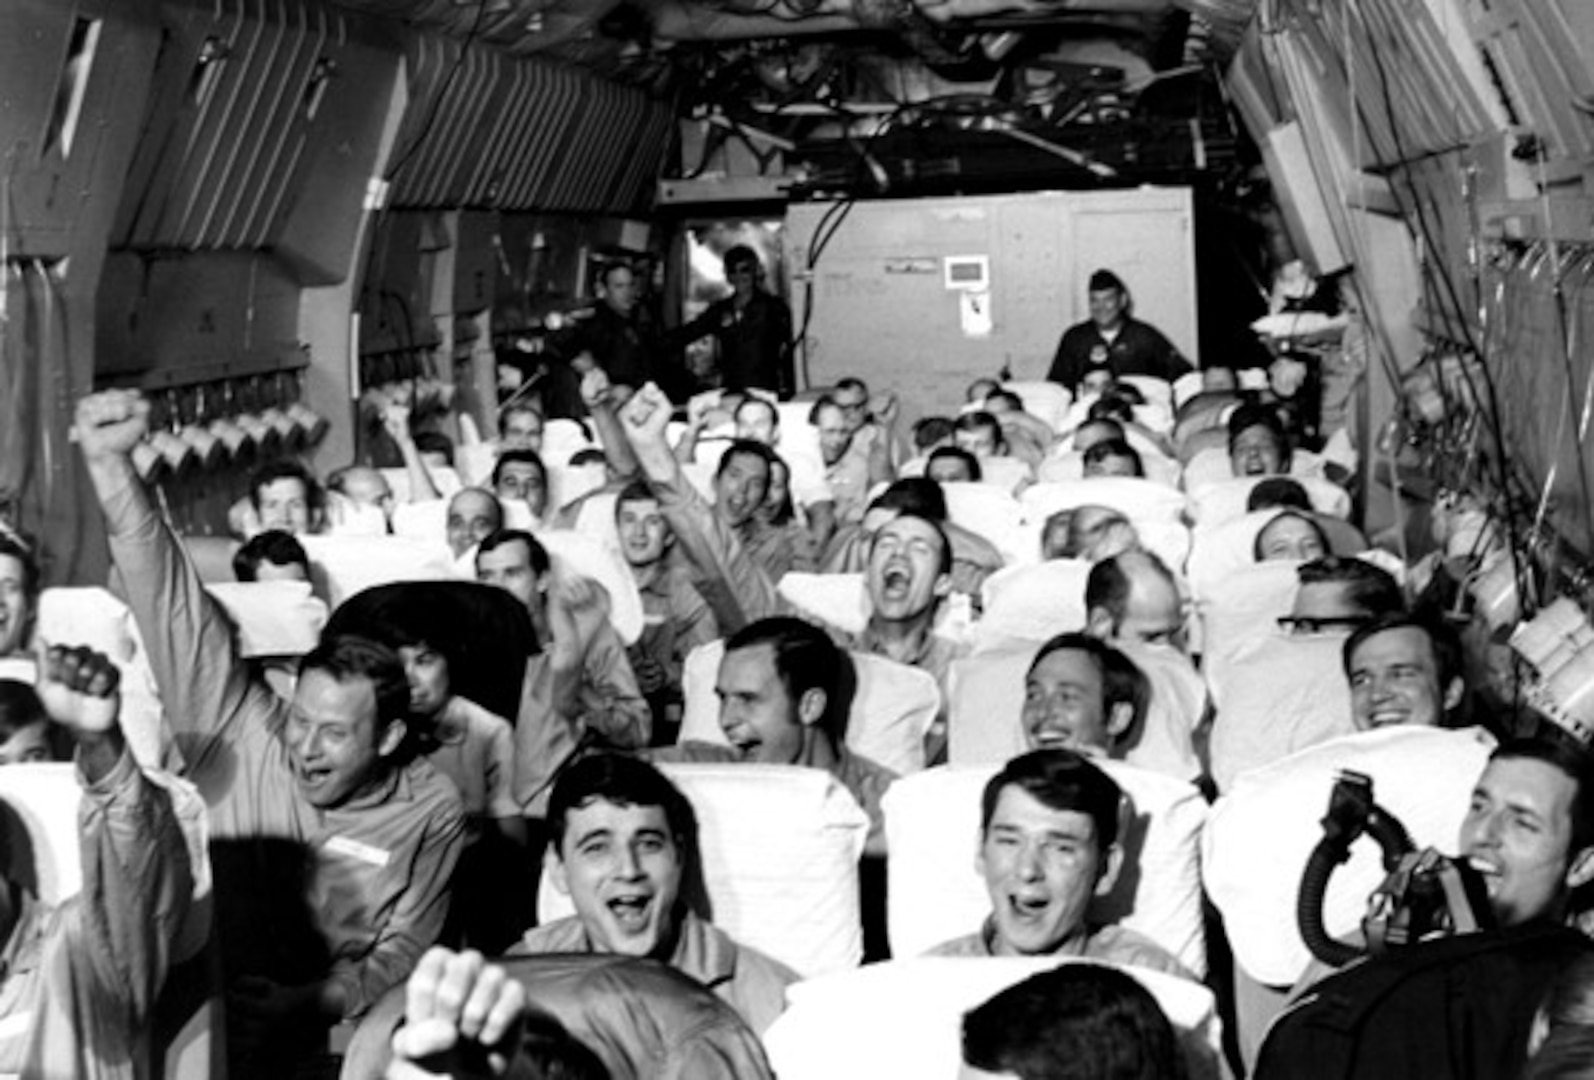 Newly freed prisoners of war celebrate as their aircraft takes off from Hanoi, North Vietnam, Feb. 12, 1973. Operation Homecoming, a massive four-month effort, from February to May in 1973, brought home more than 590 American servicemen held in POW camps in North Vietnam. (U.S. Air Force photo) (caption cited from http://www.AF.mil)
